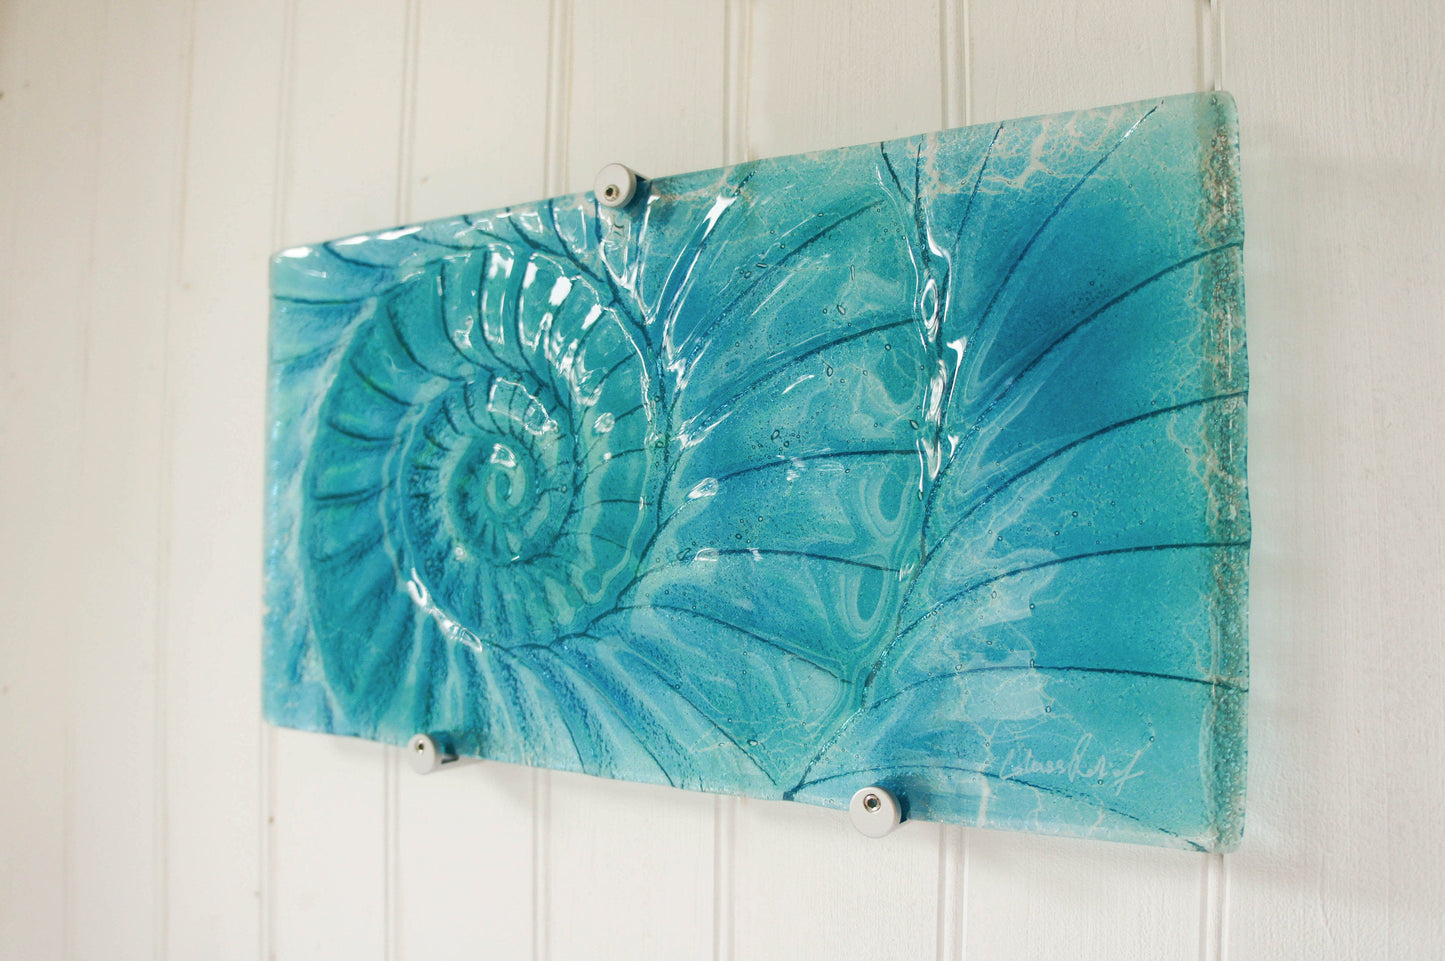 Ammonite Wall Panel -  Medium Landscape - Turquoise Blue - 42x22cm(16x9") with fixings